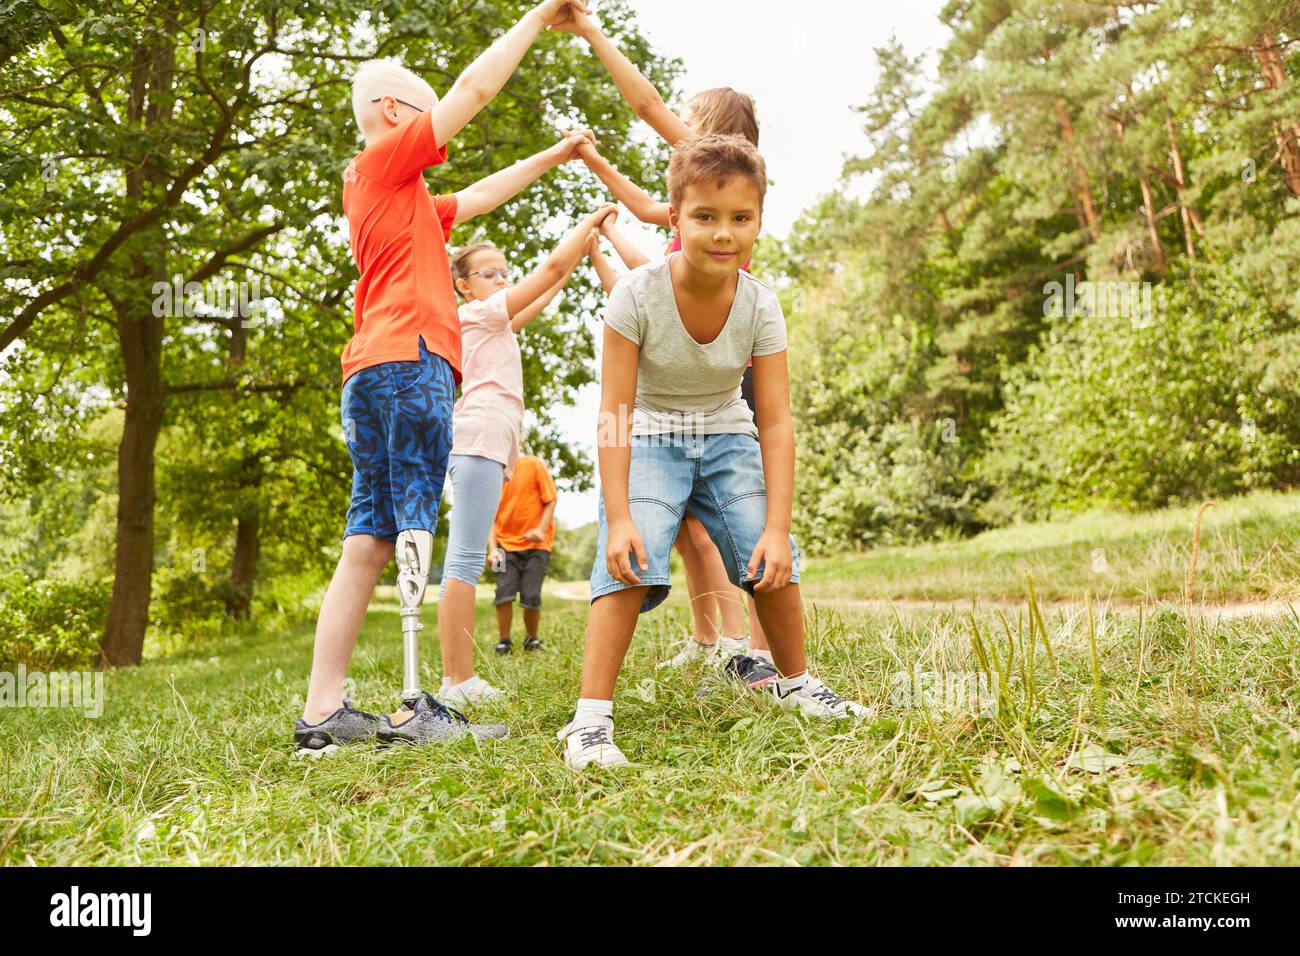 Boy standing near friends playing together and having fun at park Stock Photo